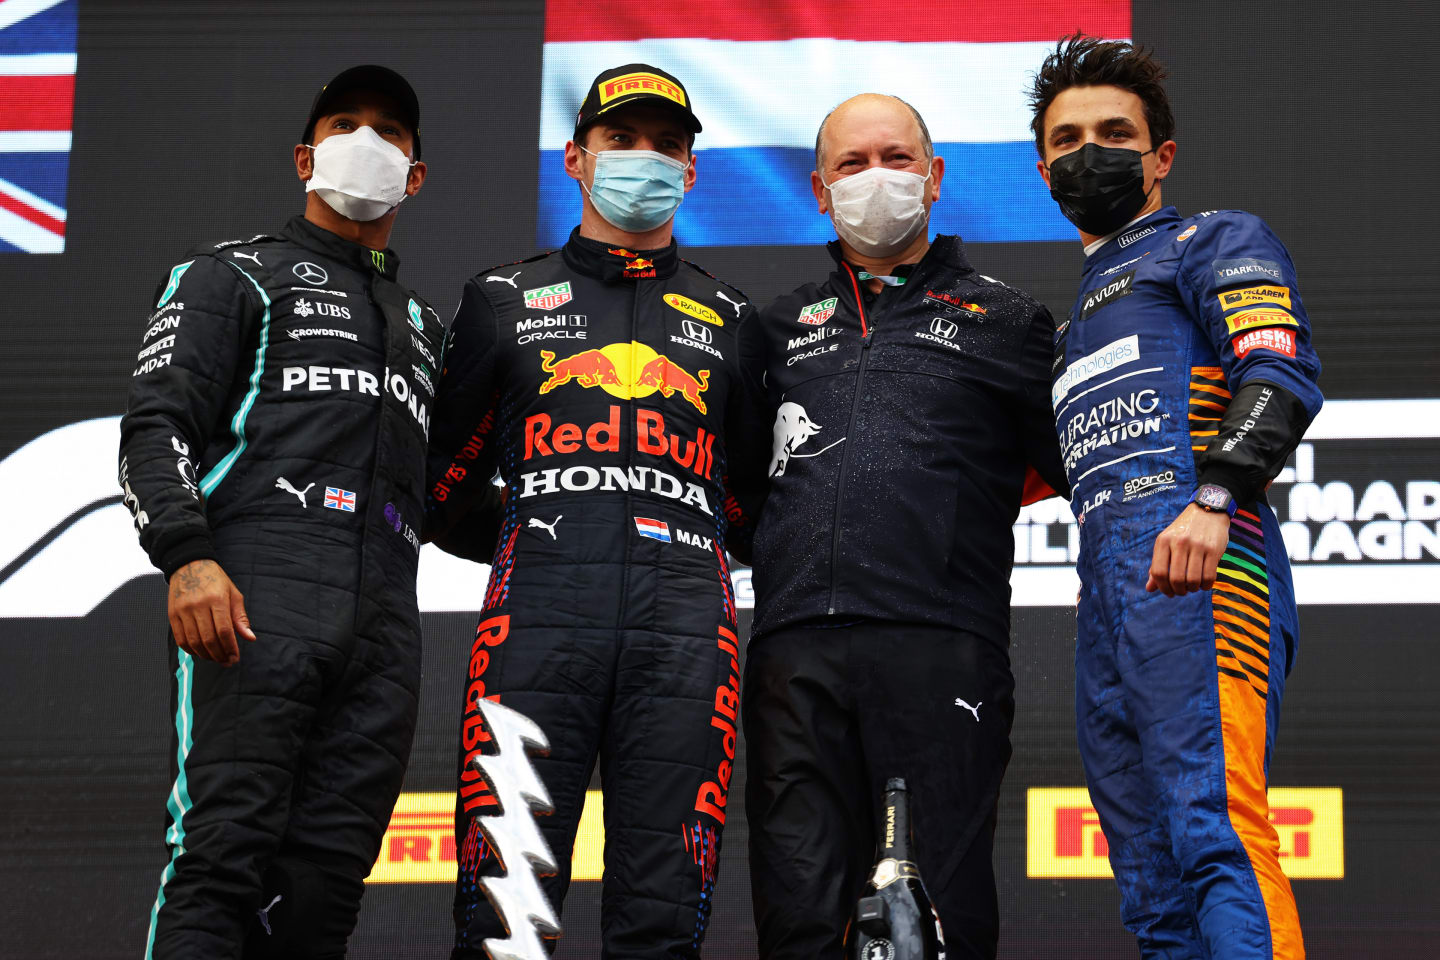 IMOLA, ITALY - APRIL 18: Second placed Lewis Hamilton of Great Britain and Mercedes GP, race winner Max Verstappen of Netherlands and Red Bull Racing, Alastair Rew, Financial Director of Red Bull Racing and third placed Lando Norris of Great Britain and McLaren F1 celebrate on the podium after the F1 Grand Prix of Emilia Romagna at Autodromo Enzo e Dino Ferrari on April 18, 2021 in Imola, Italy. (Photo by Bryn Lennon/Getty Images)